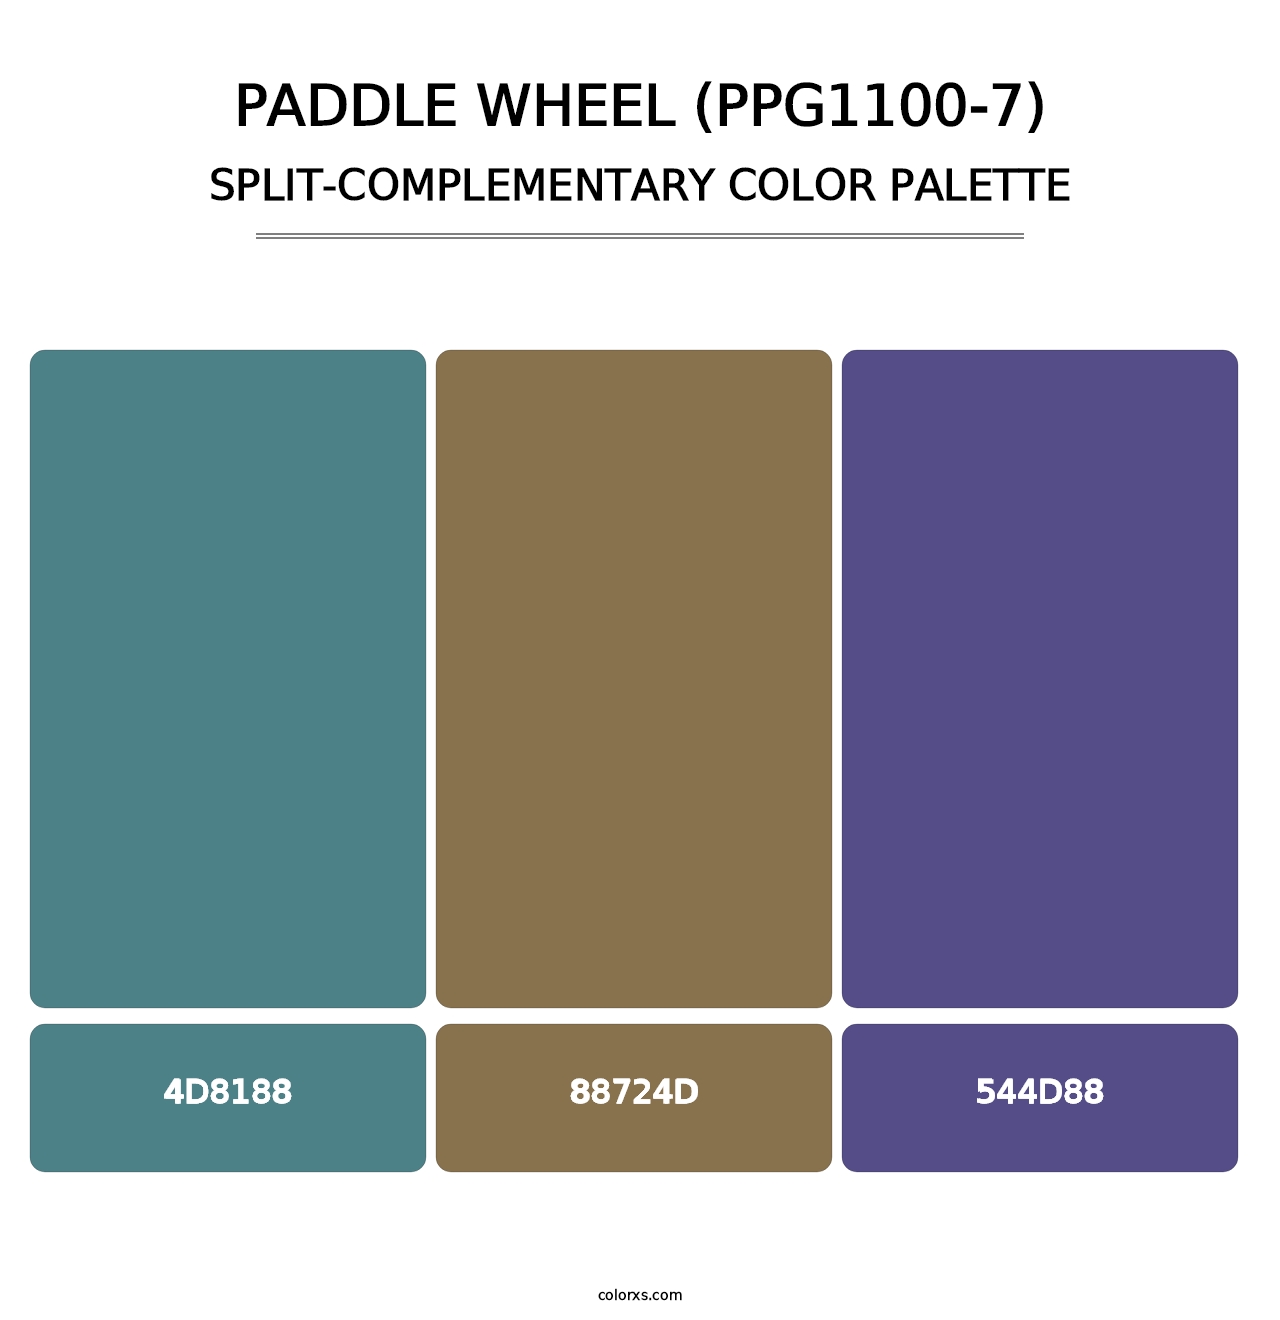 Paddle Wheel (PPG1100-7) - Split-Complementary Color Palette